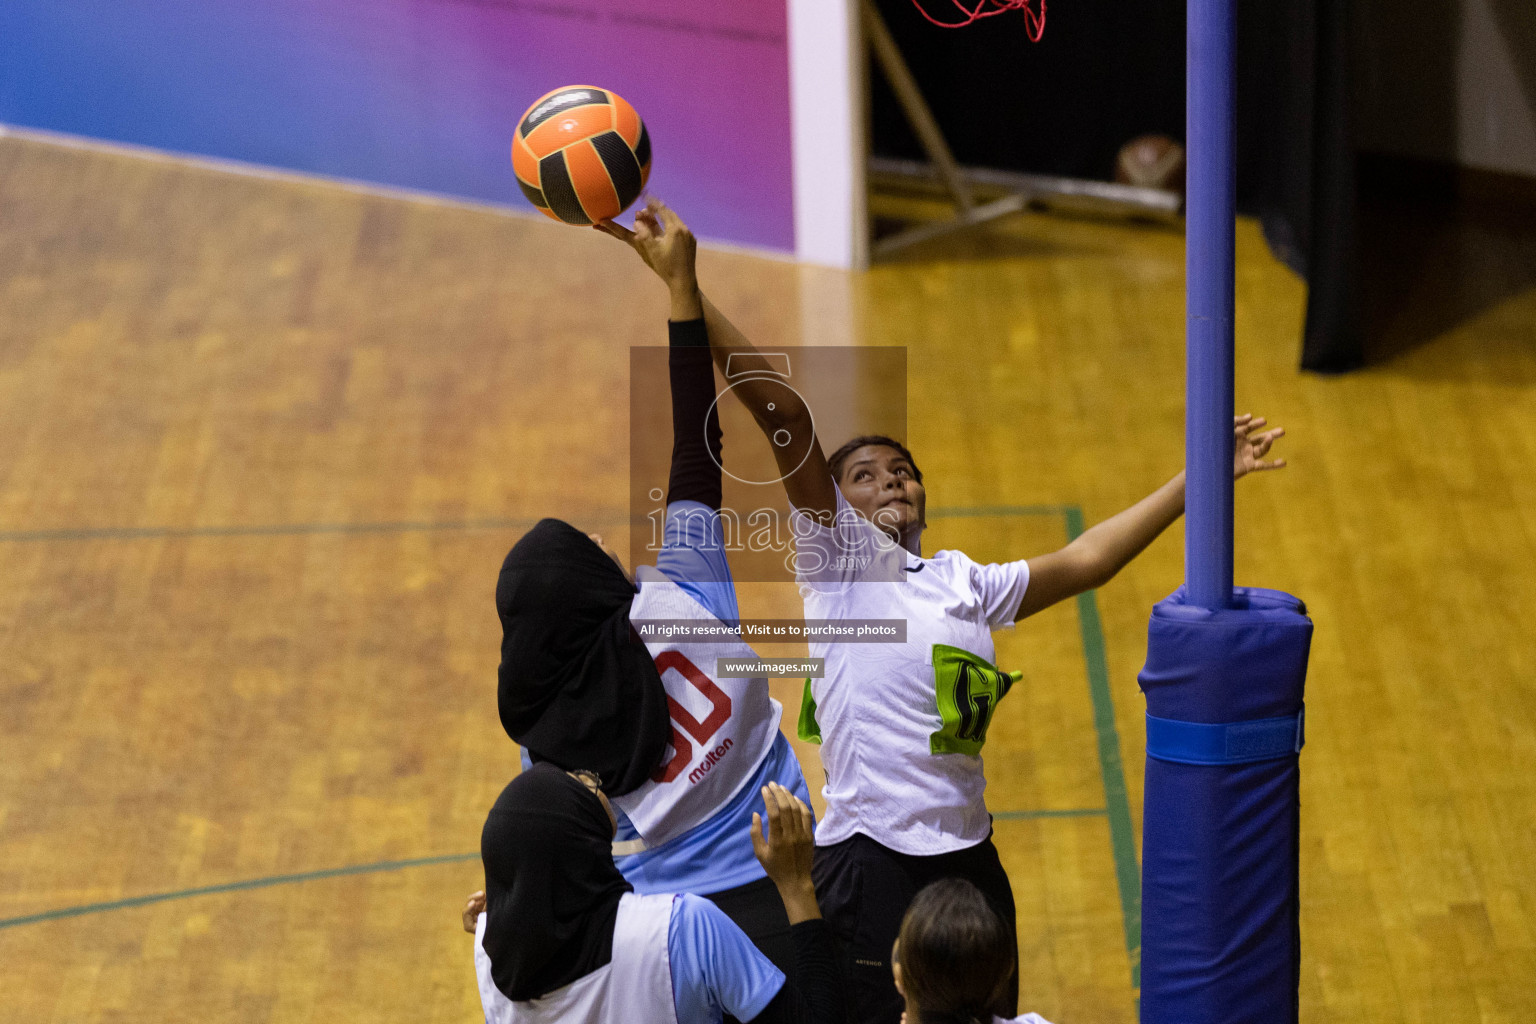 Club Green Streets vs Mahibadhoo in the Milo National Netball Tournament 2022 on 20 July 2022, held in Social Center, Male', Maldives. Photographer: Shuu / Images.mv